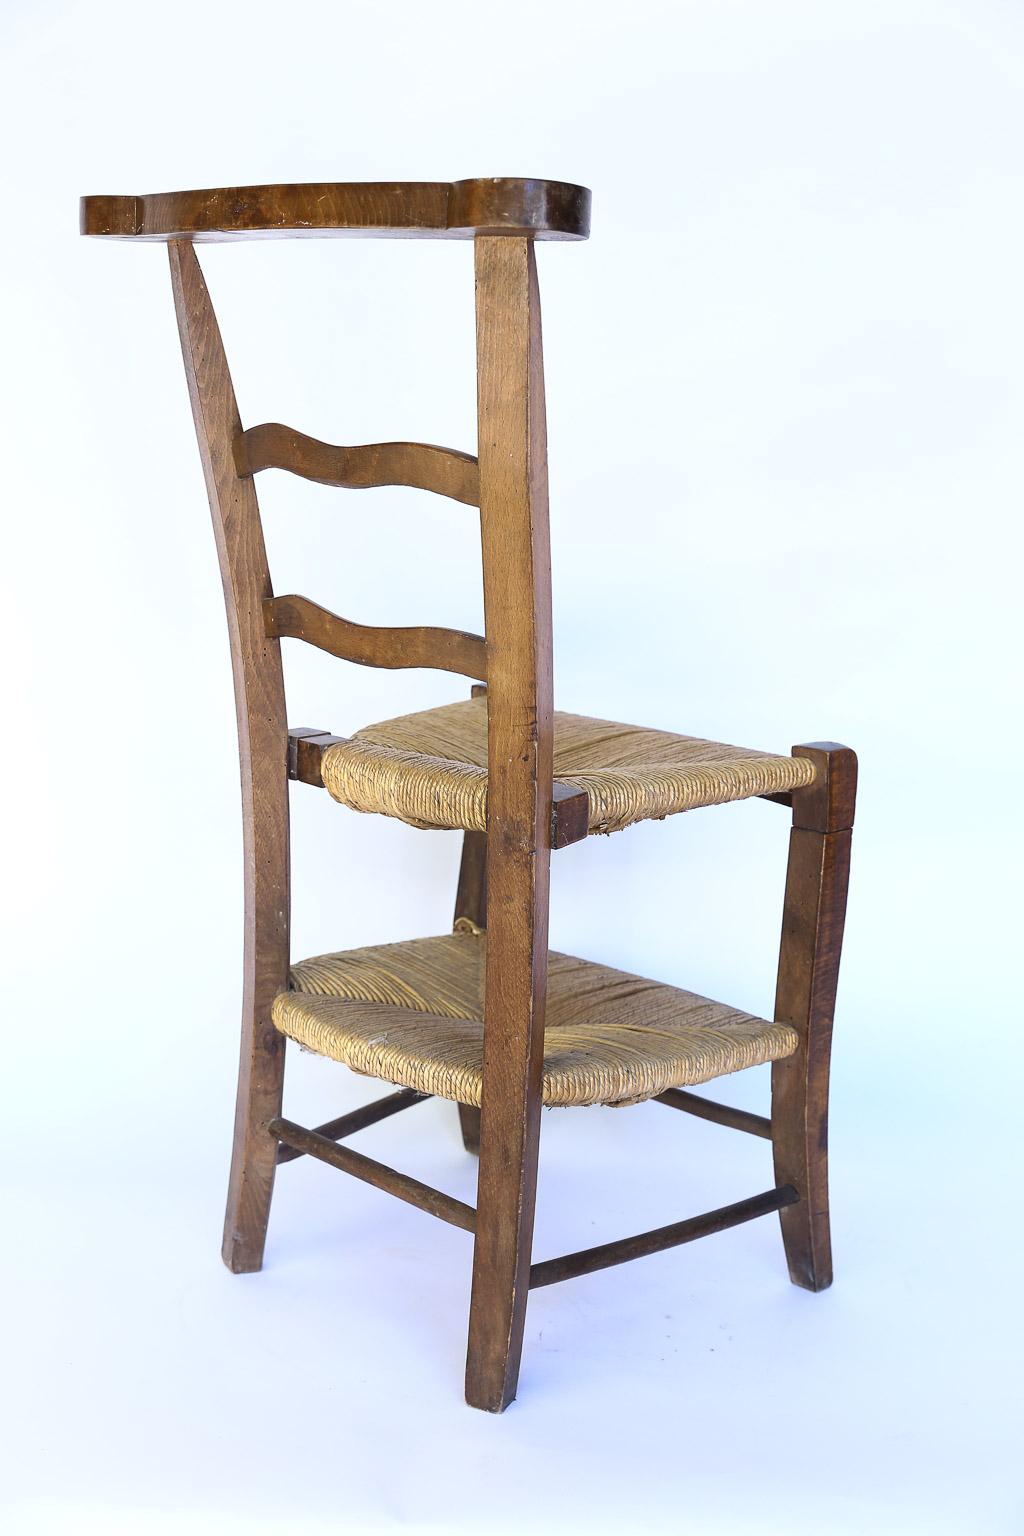 This charming prie dieu was once used in a French church as both chair and kneeler. The 17.5